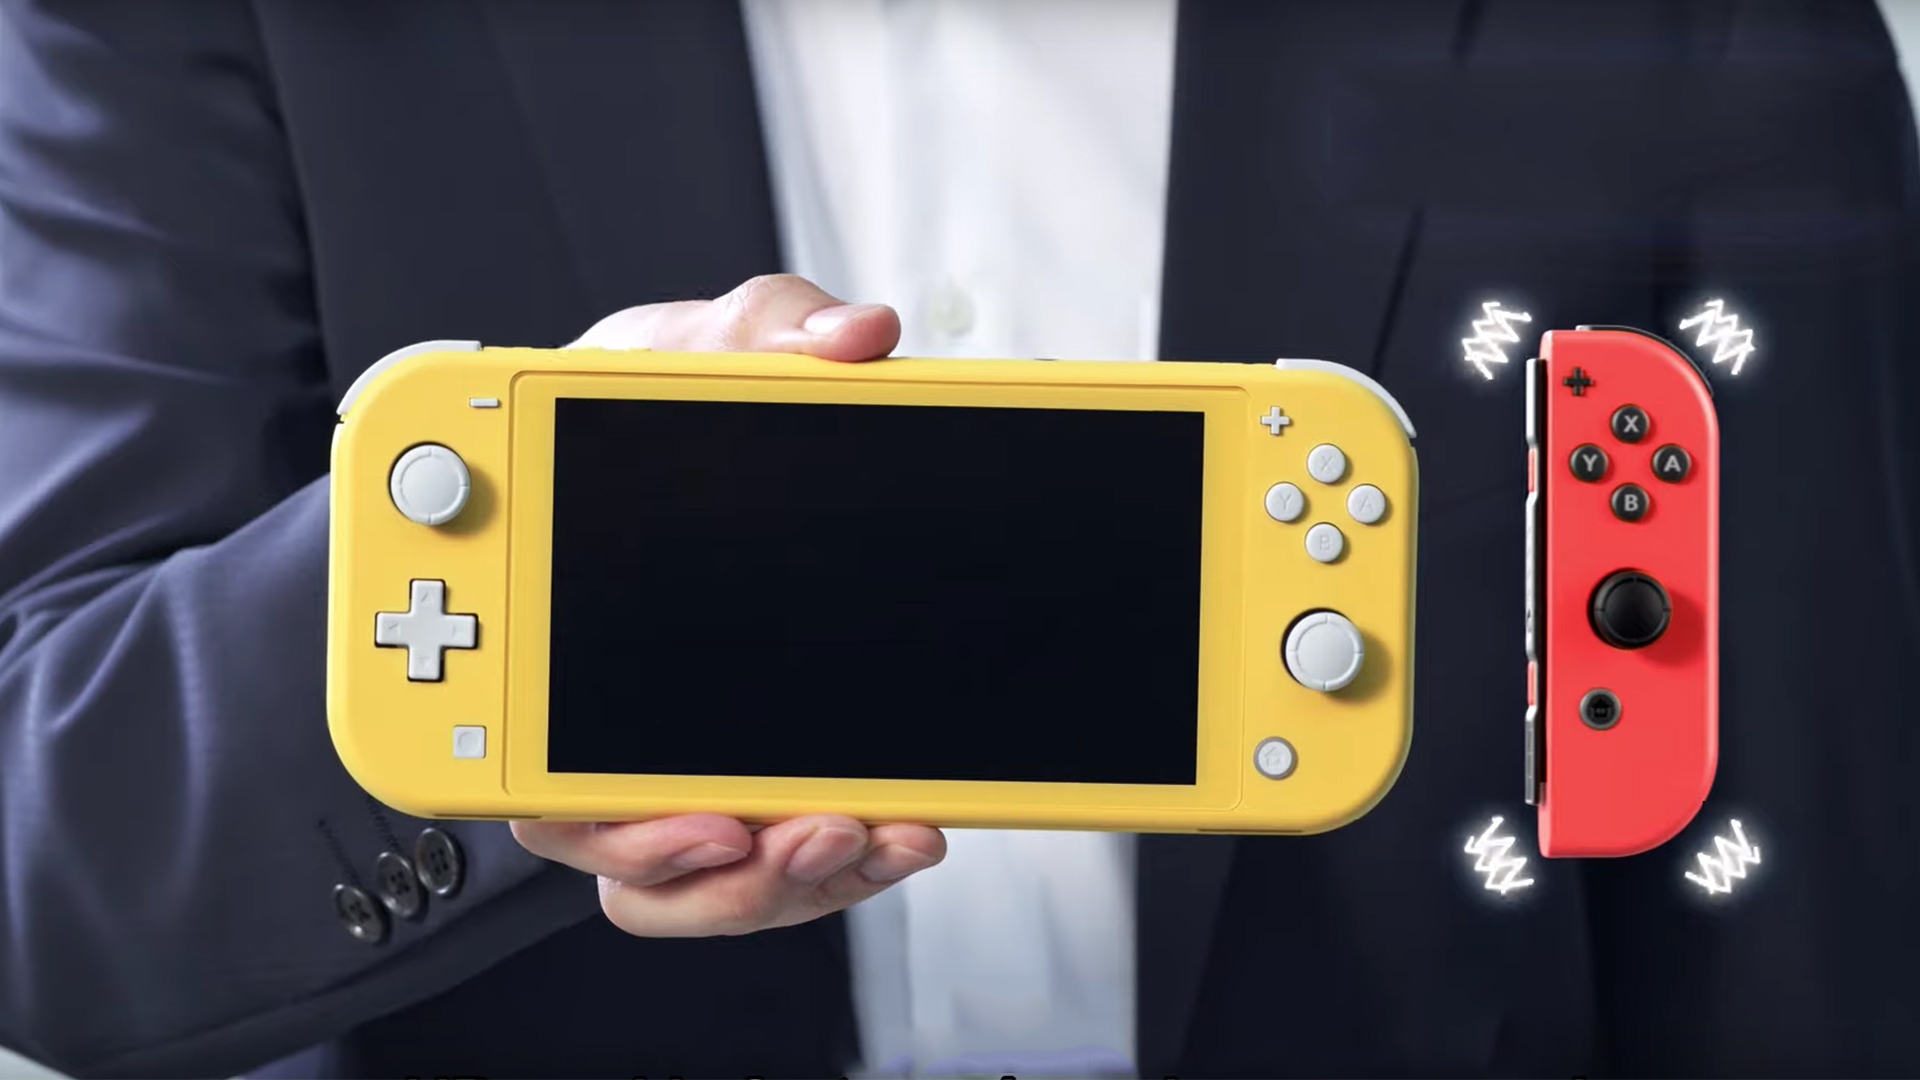 How To Connect An Extra Joy Con To The Nintendo Switch Lite For